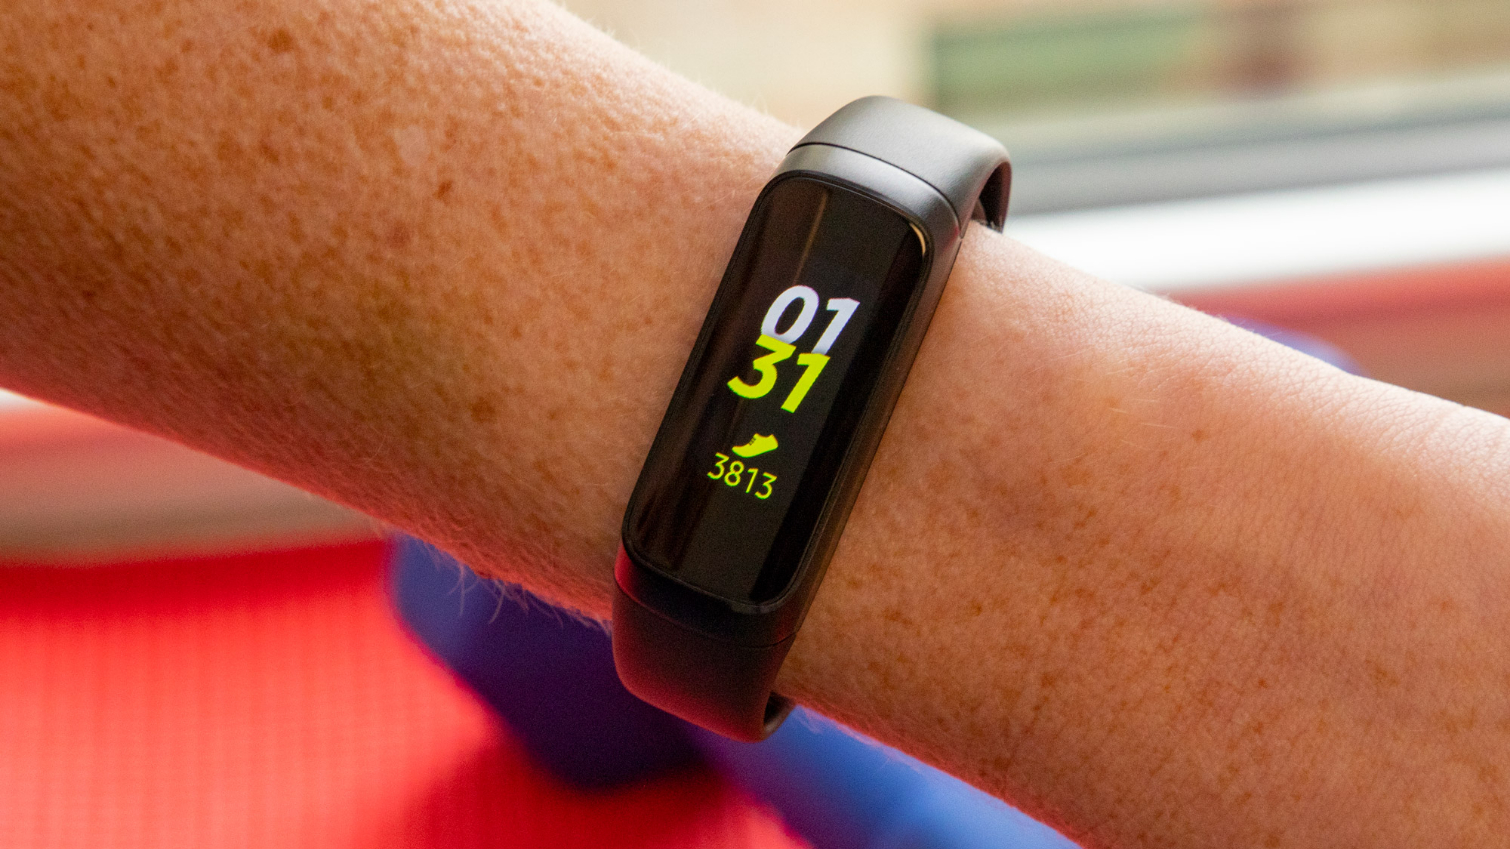 fitbit or samsung galaxy fit